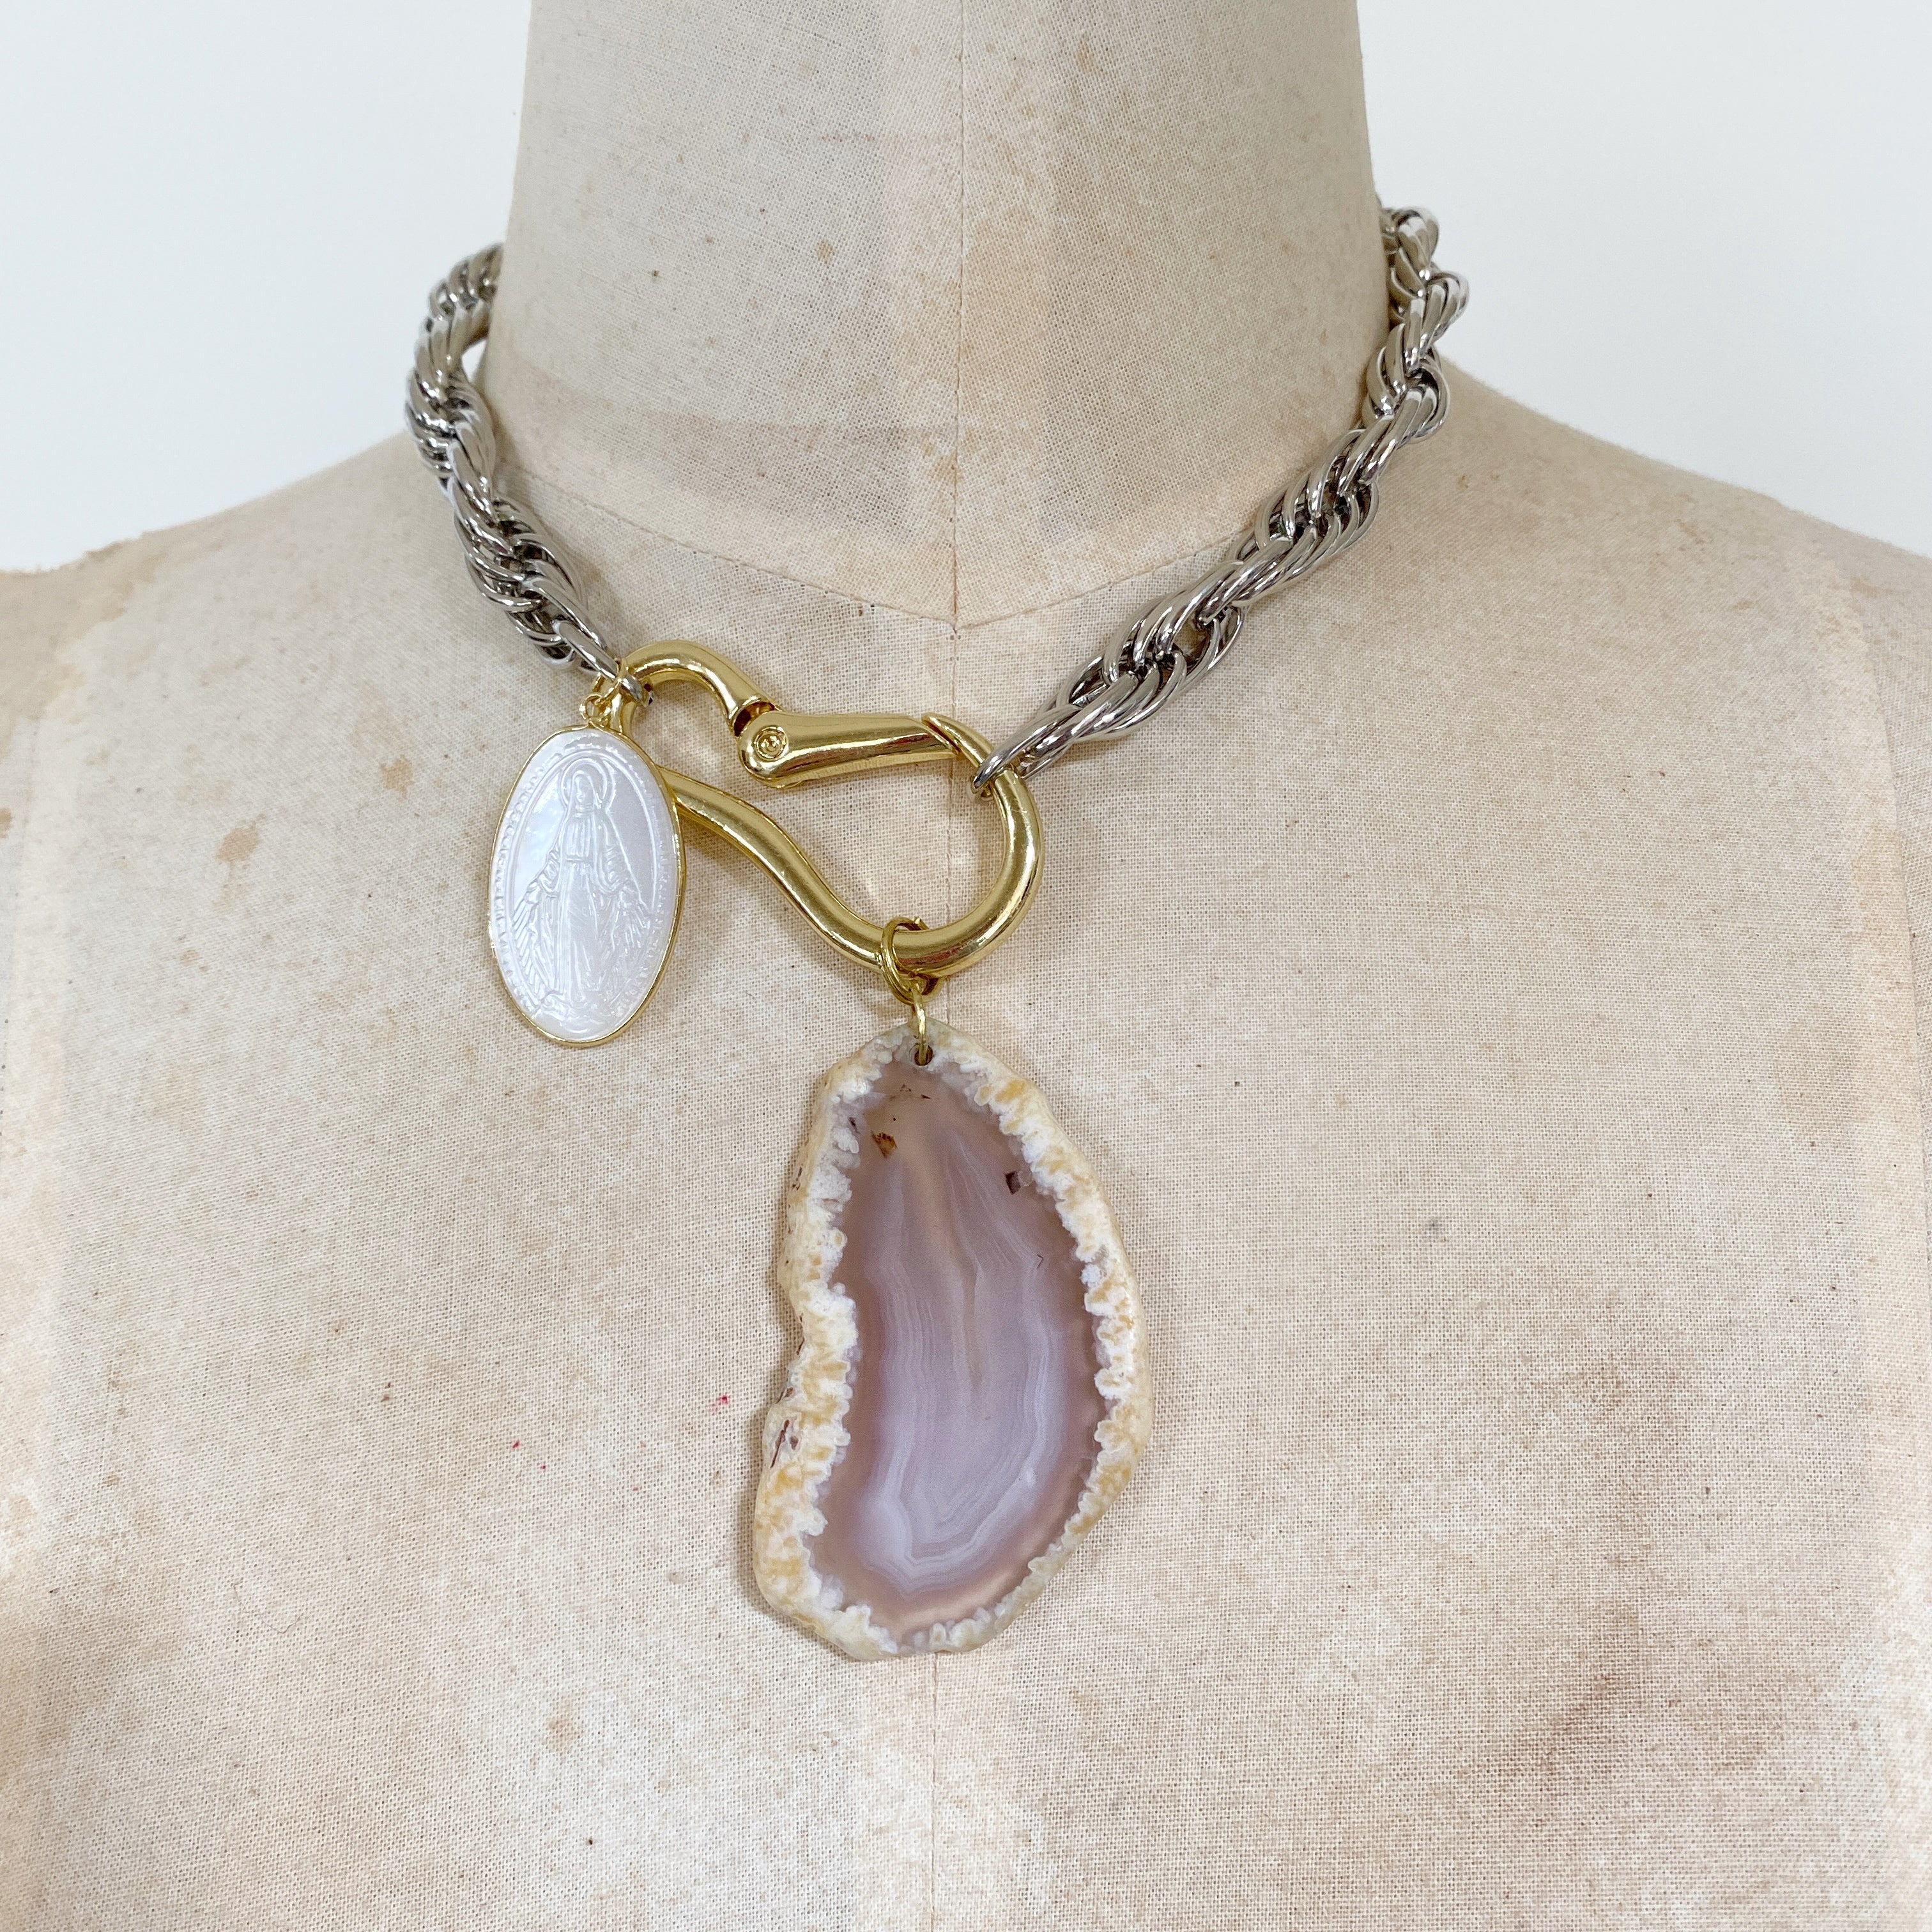 Tribal Mine Maria Necklace with agate and mother of pearl pendant